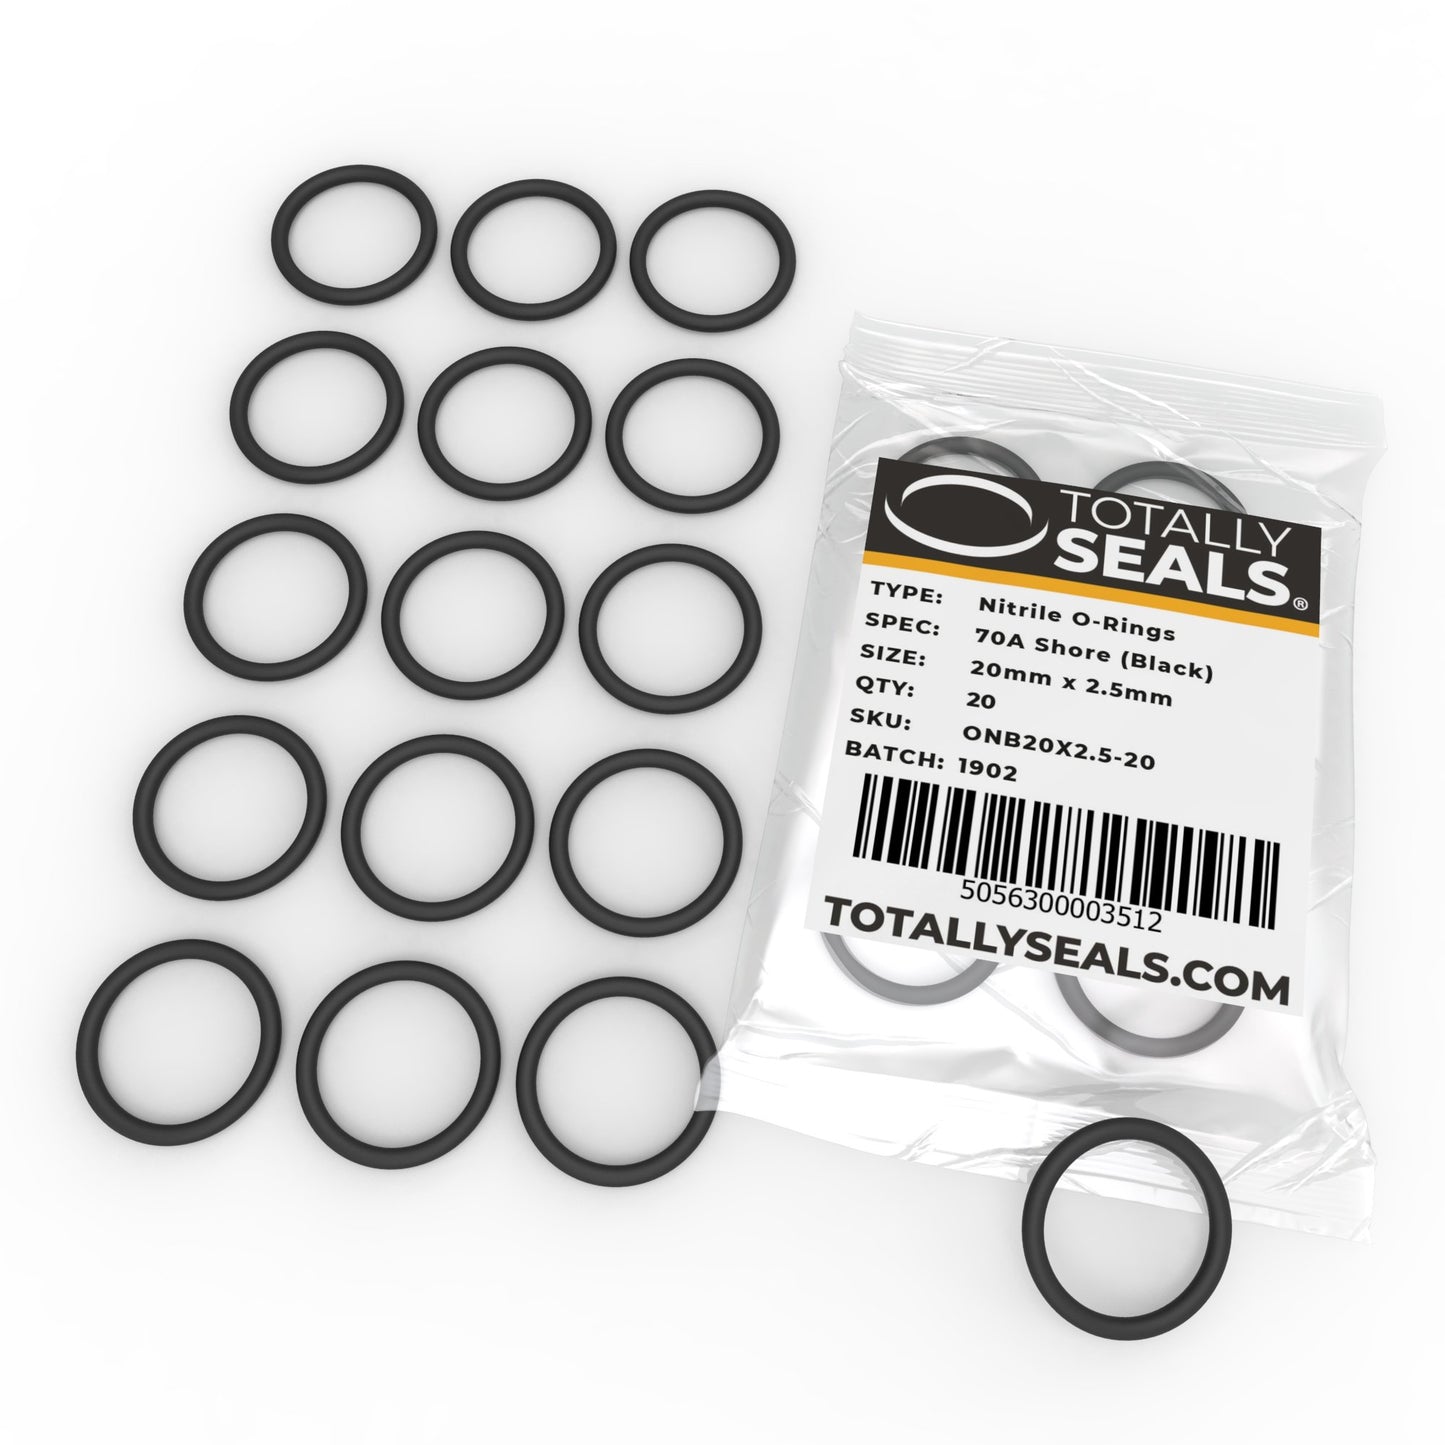 20mm x 2.5mm (25mm OD) Nitrile O-Rings - Totally Seals®